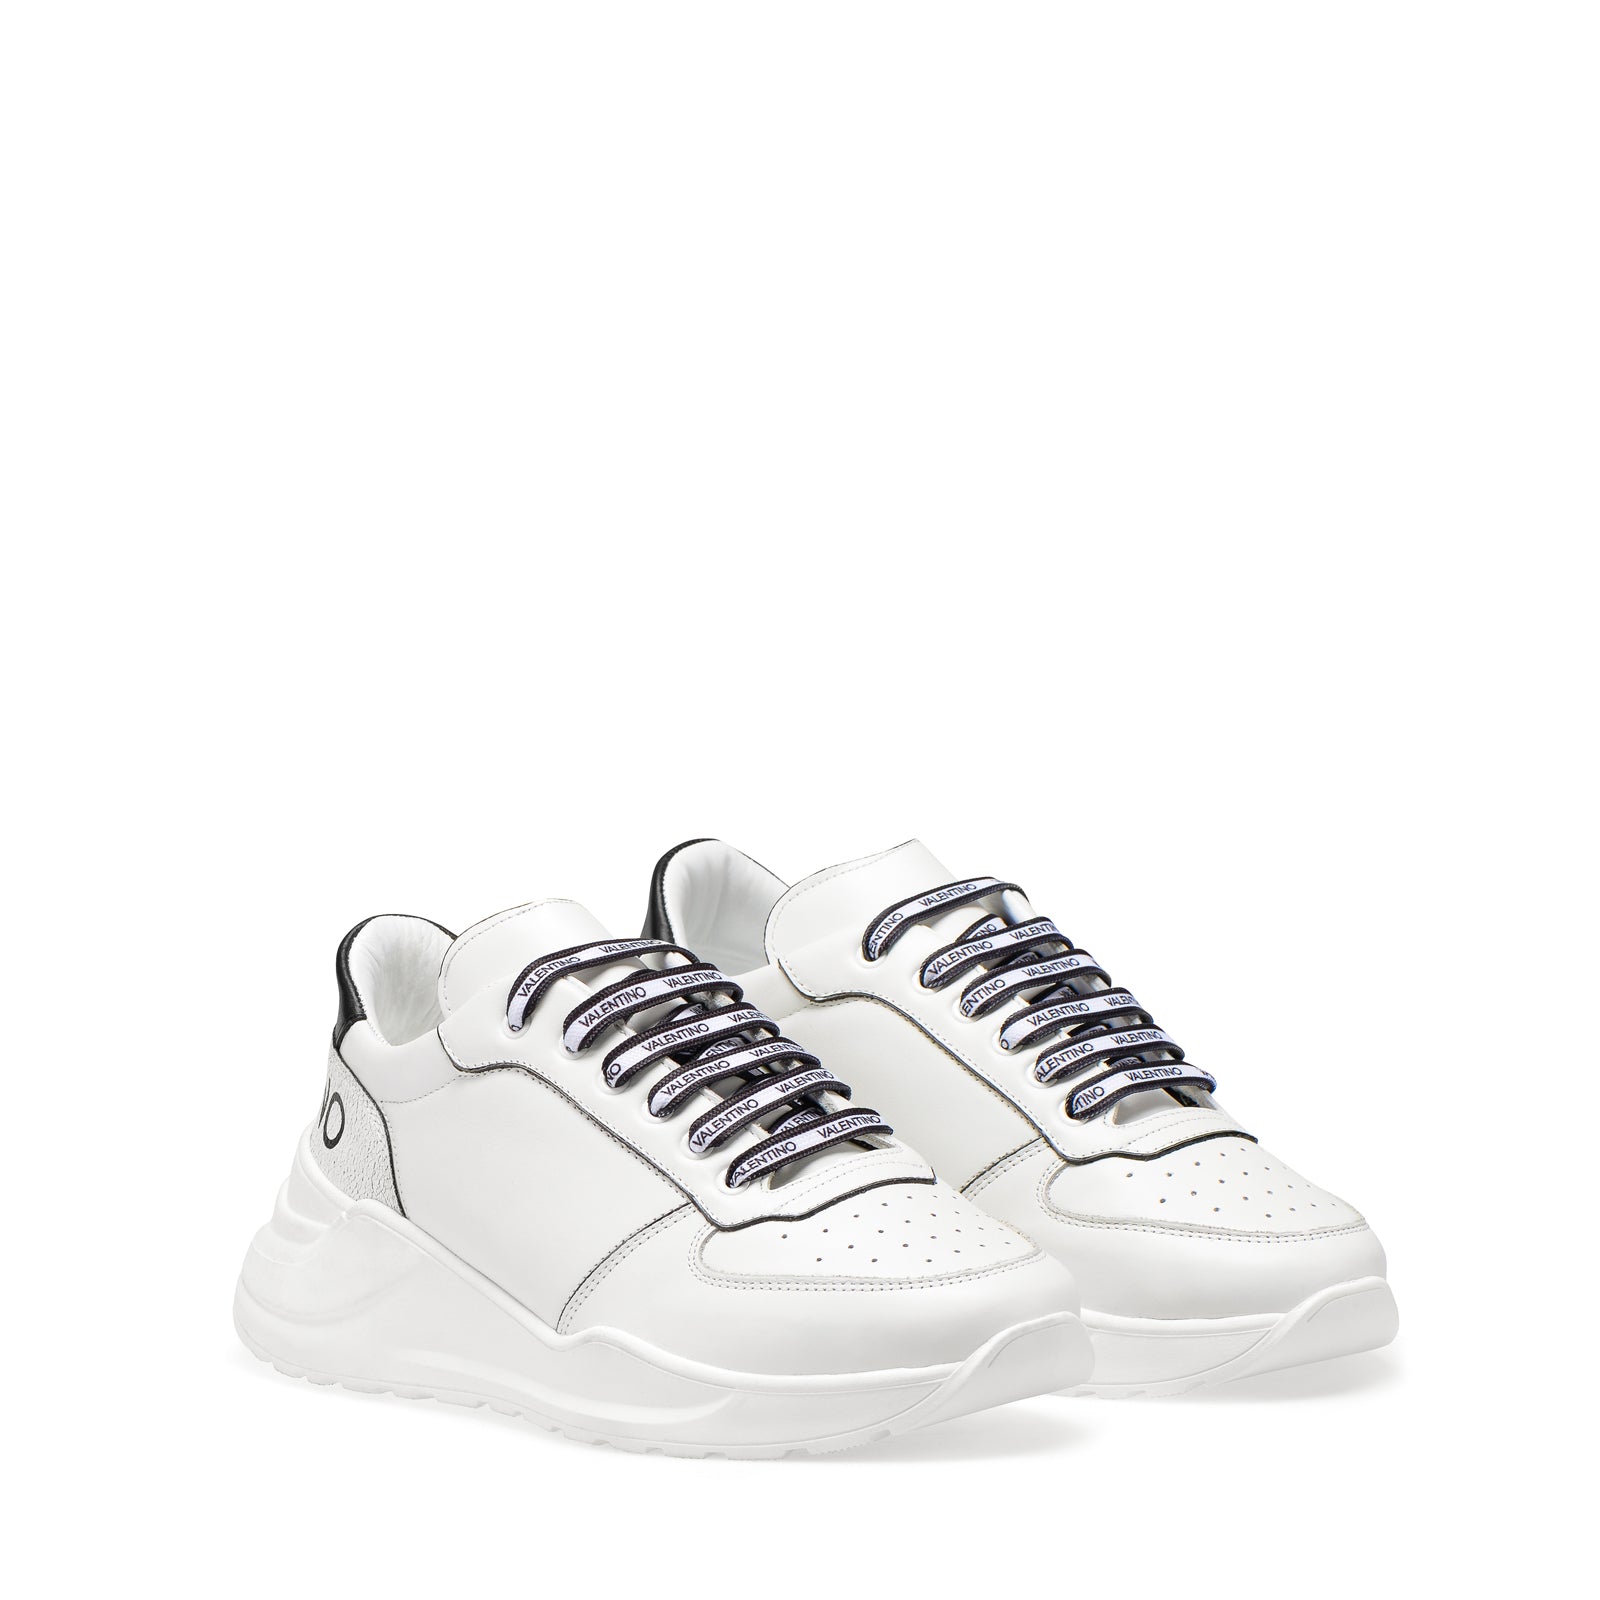 Bot werkzaamheid Sobriquette Valentino Man Chunky Sneakers with Bold Sole I New Collection – Valentino  Shoes UAE